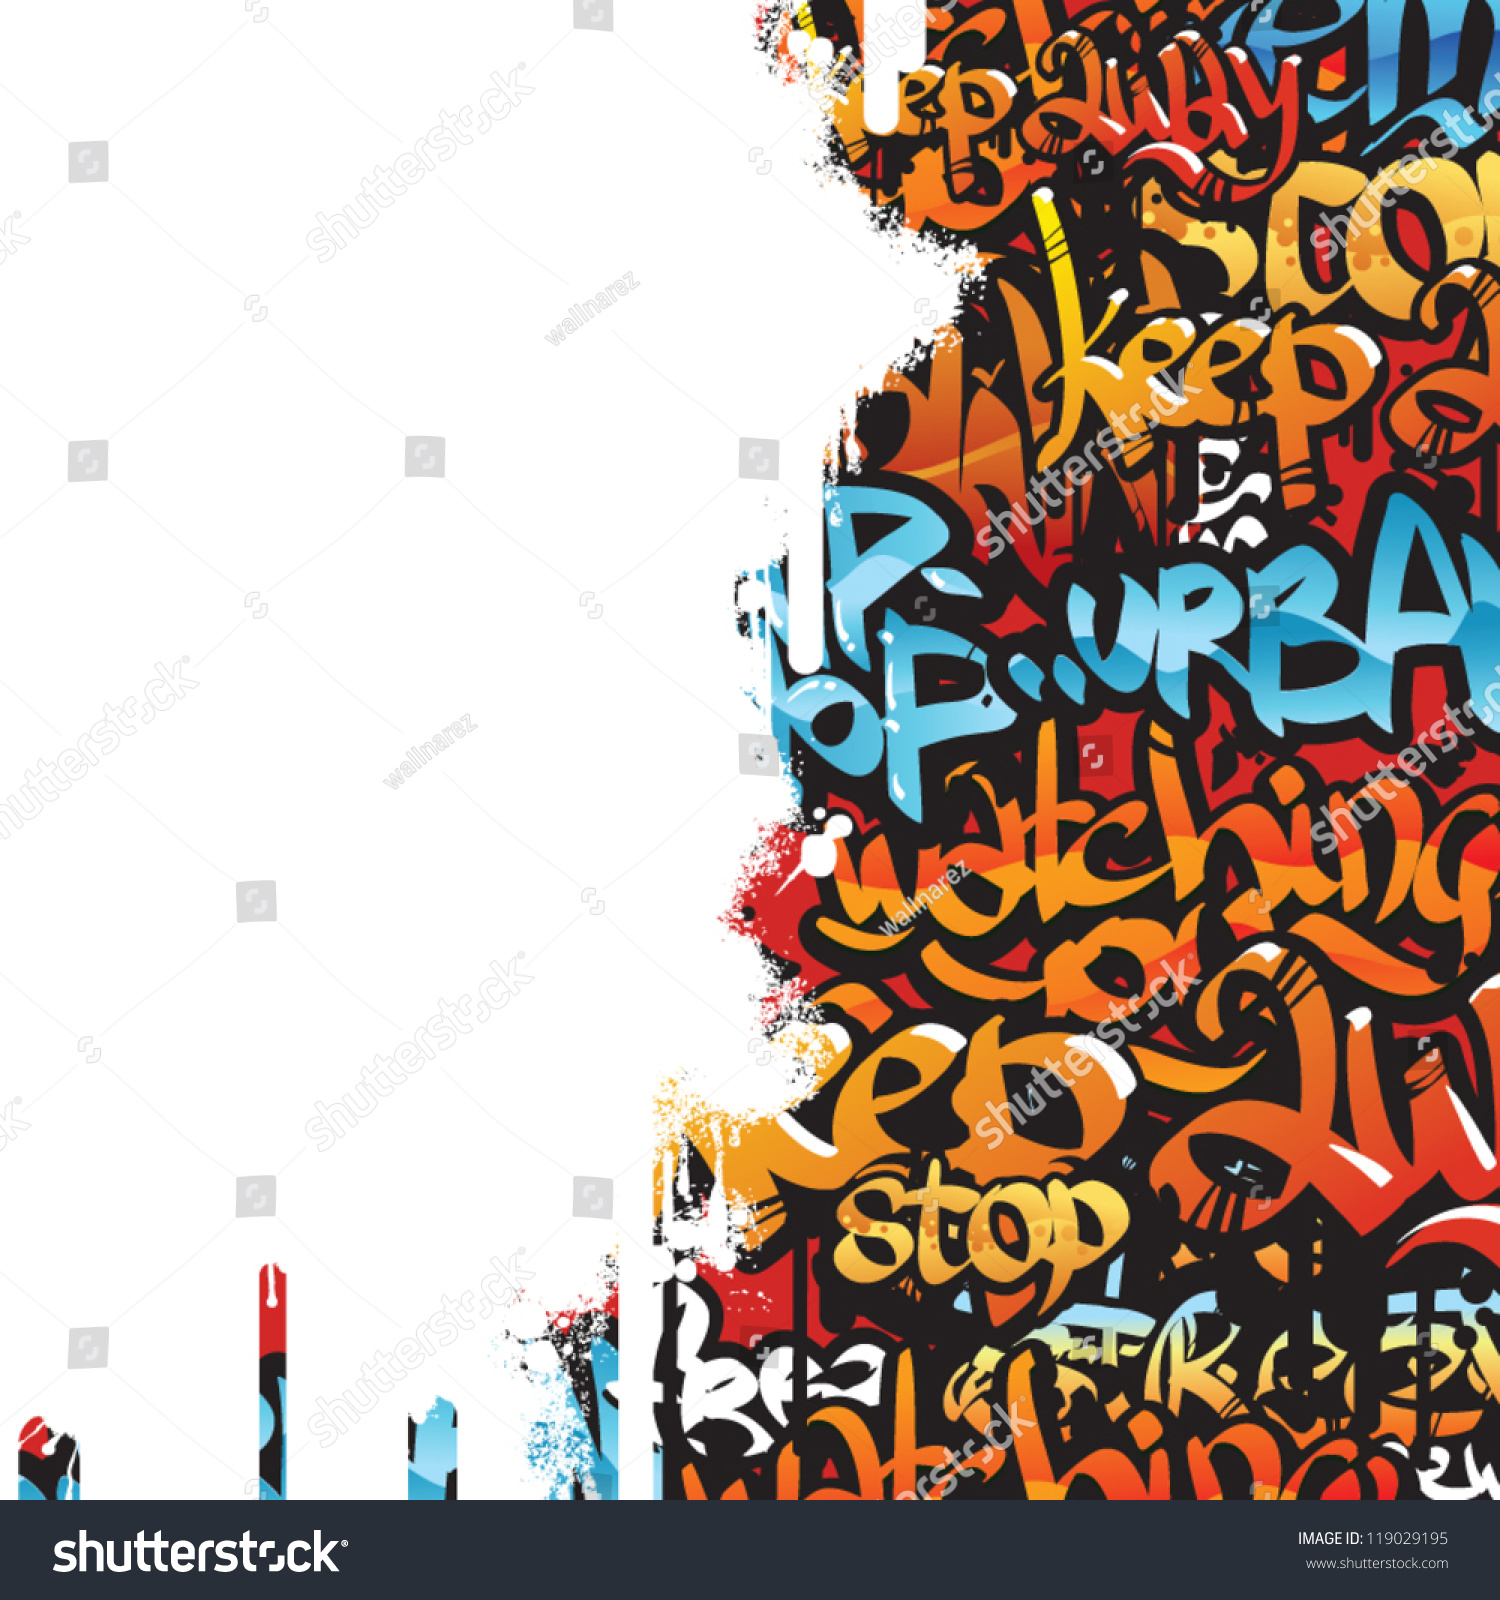 Graffiti Vector Background Design Simple Text Stock Vector Royalty Free